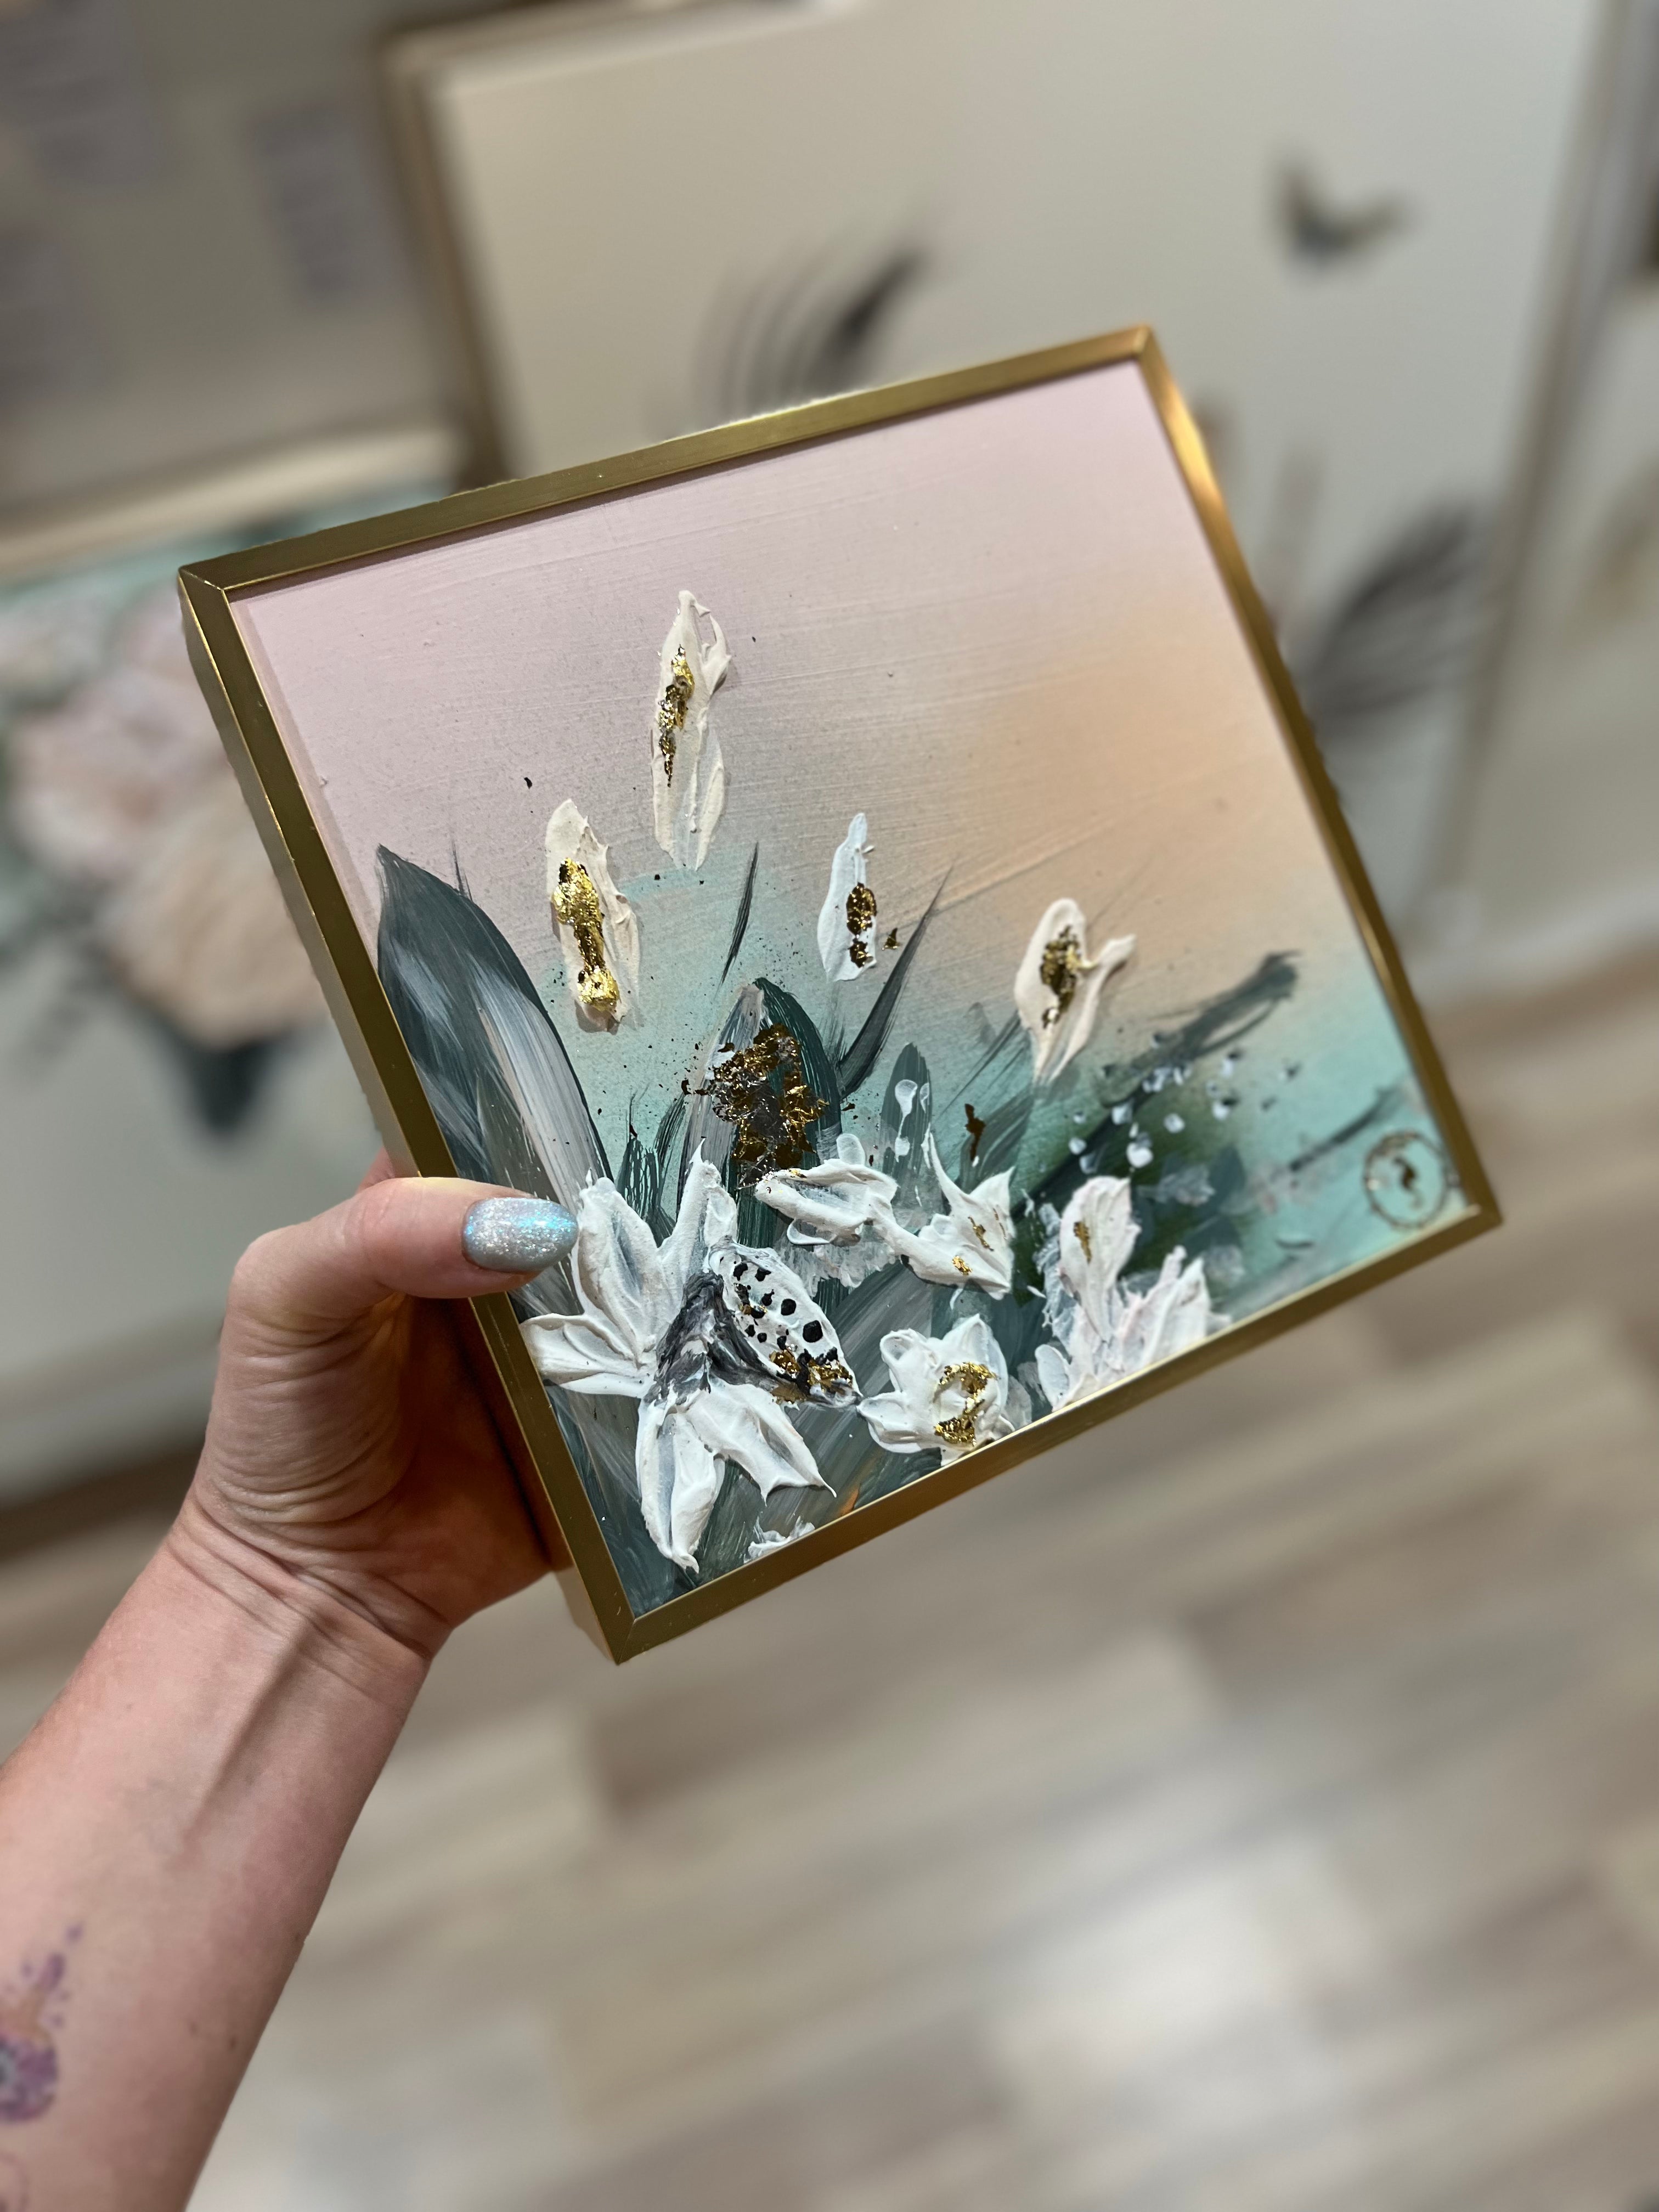 Bloom 1 Mini Artwork - Gift Idea for Mother’s Day